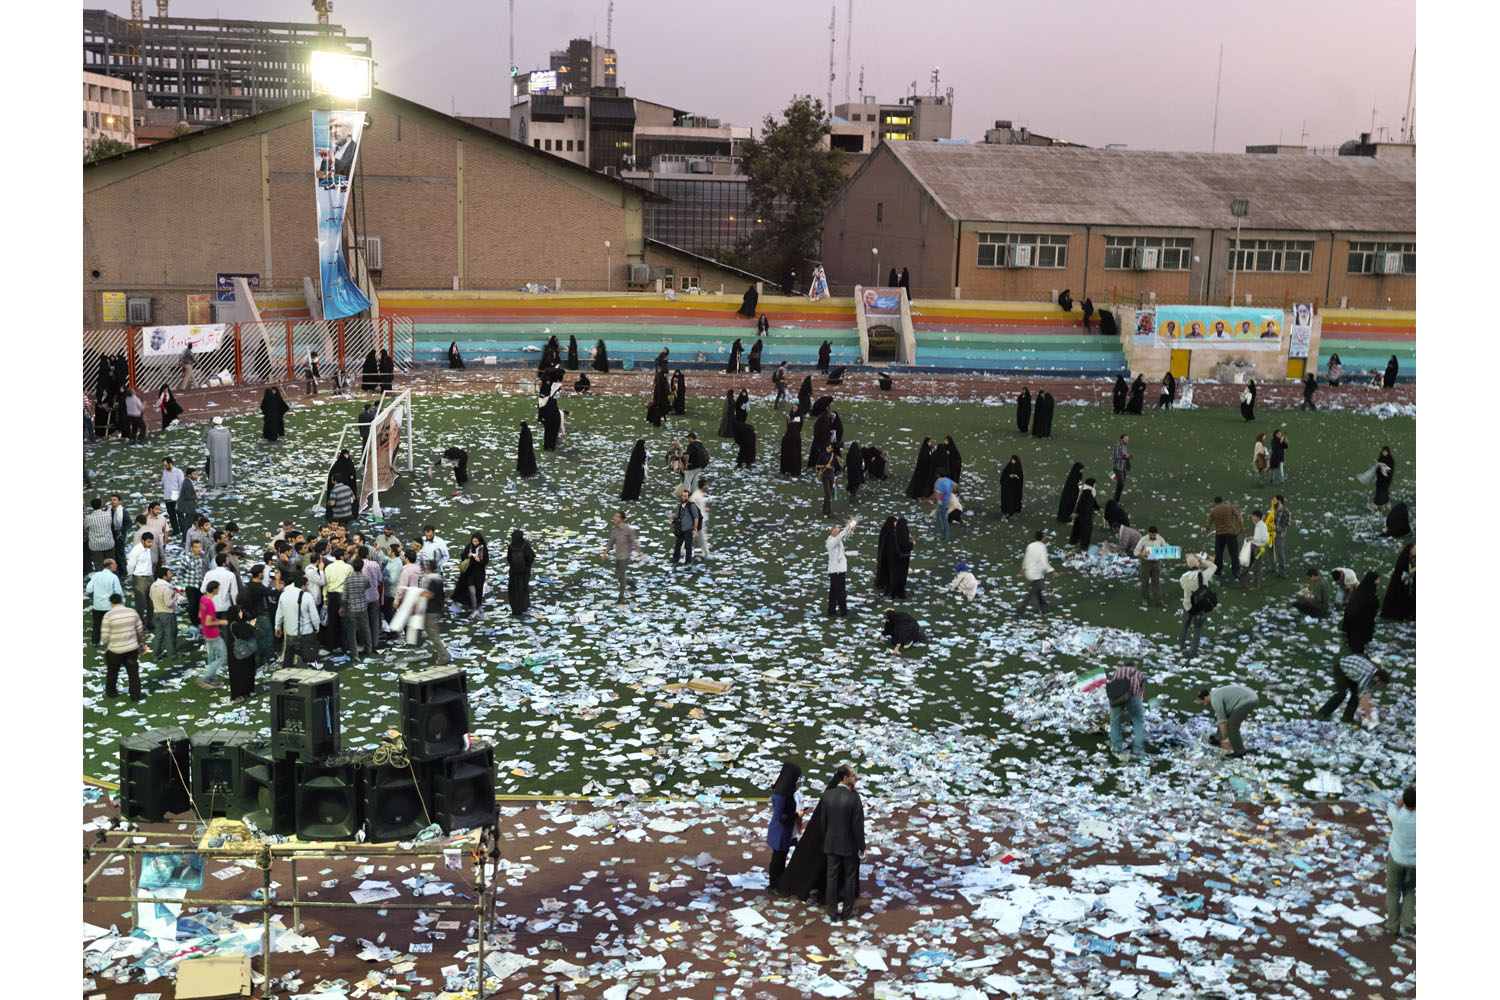 Leaflets and campaign paraphernalia litter the floor of Heidarnia Stadium in Tehran after a rally just days before the presidential vote on June 14.